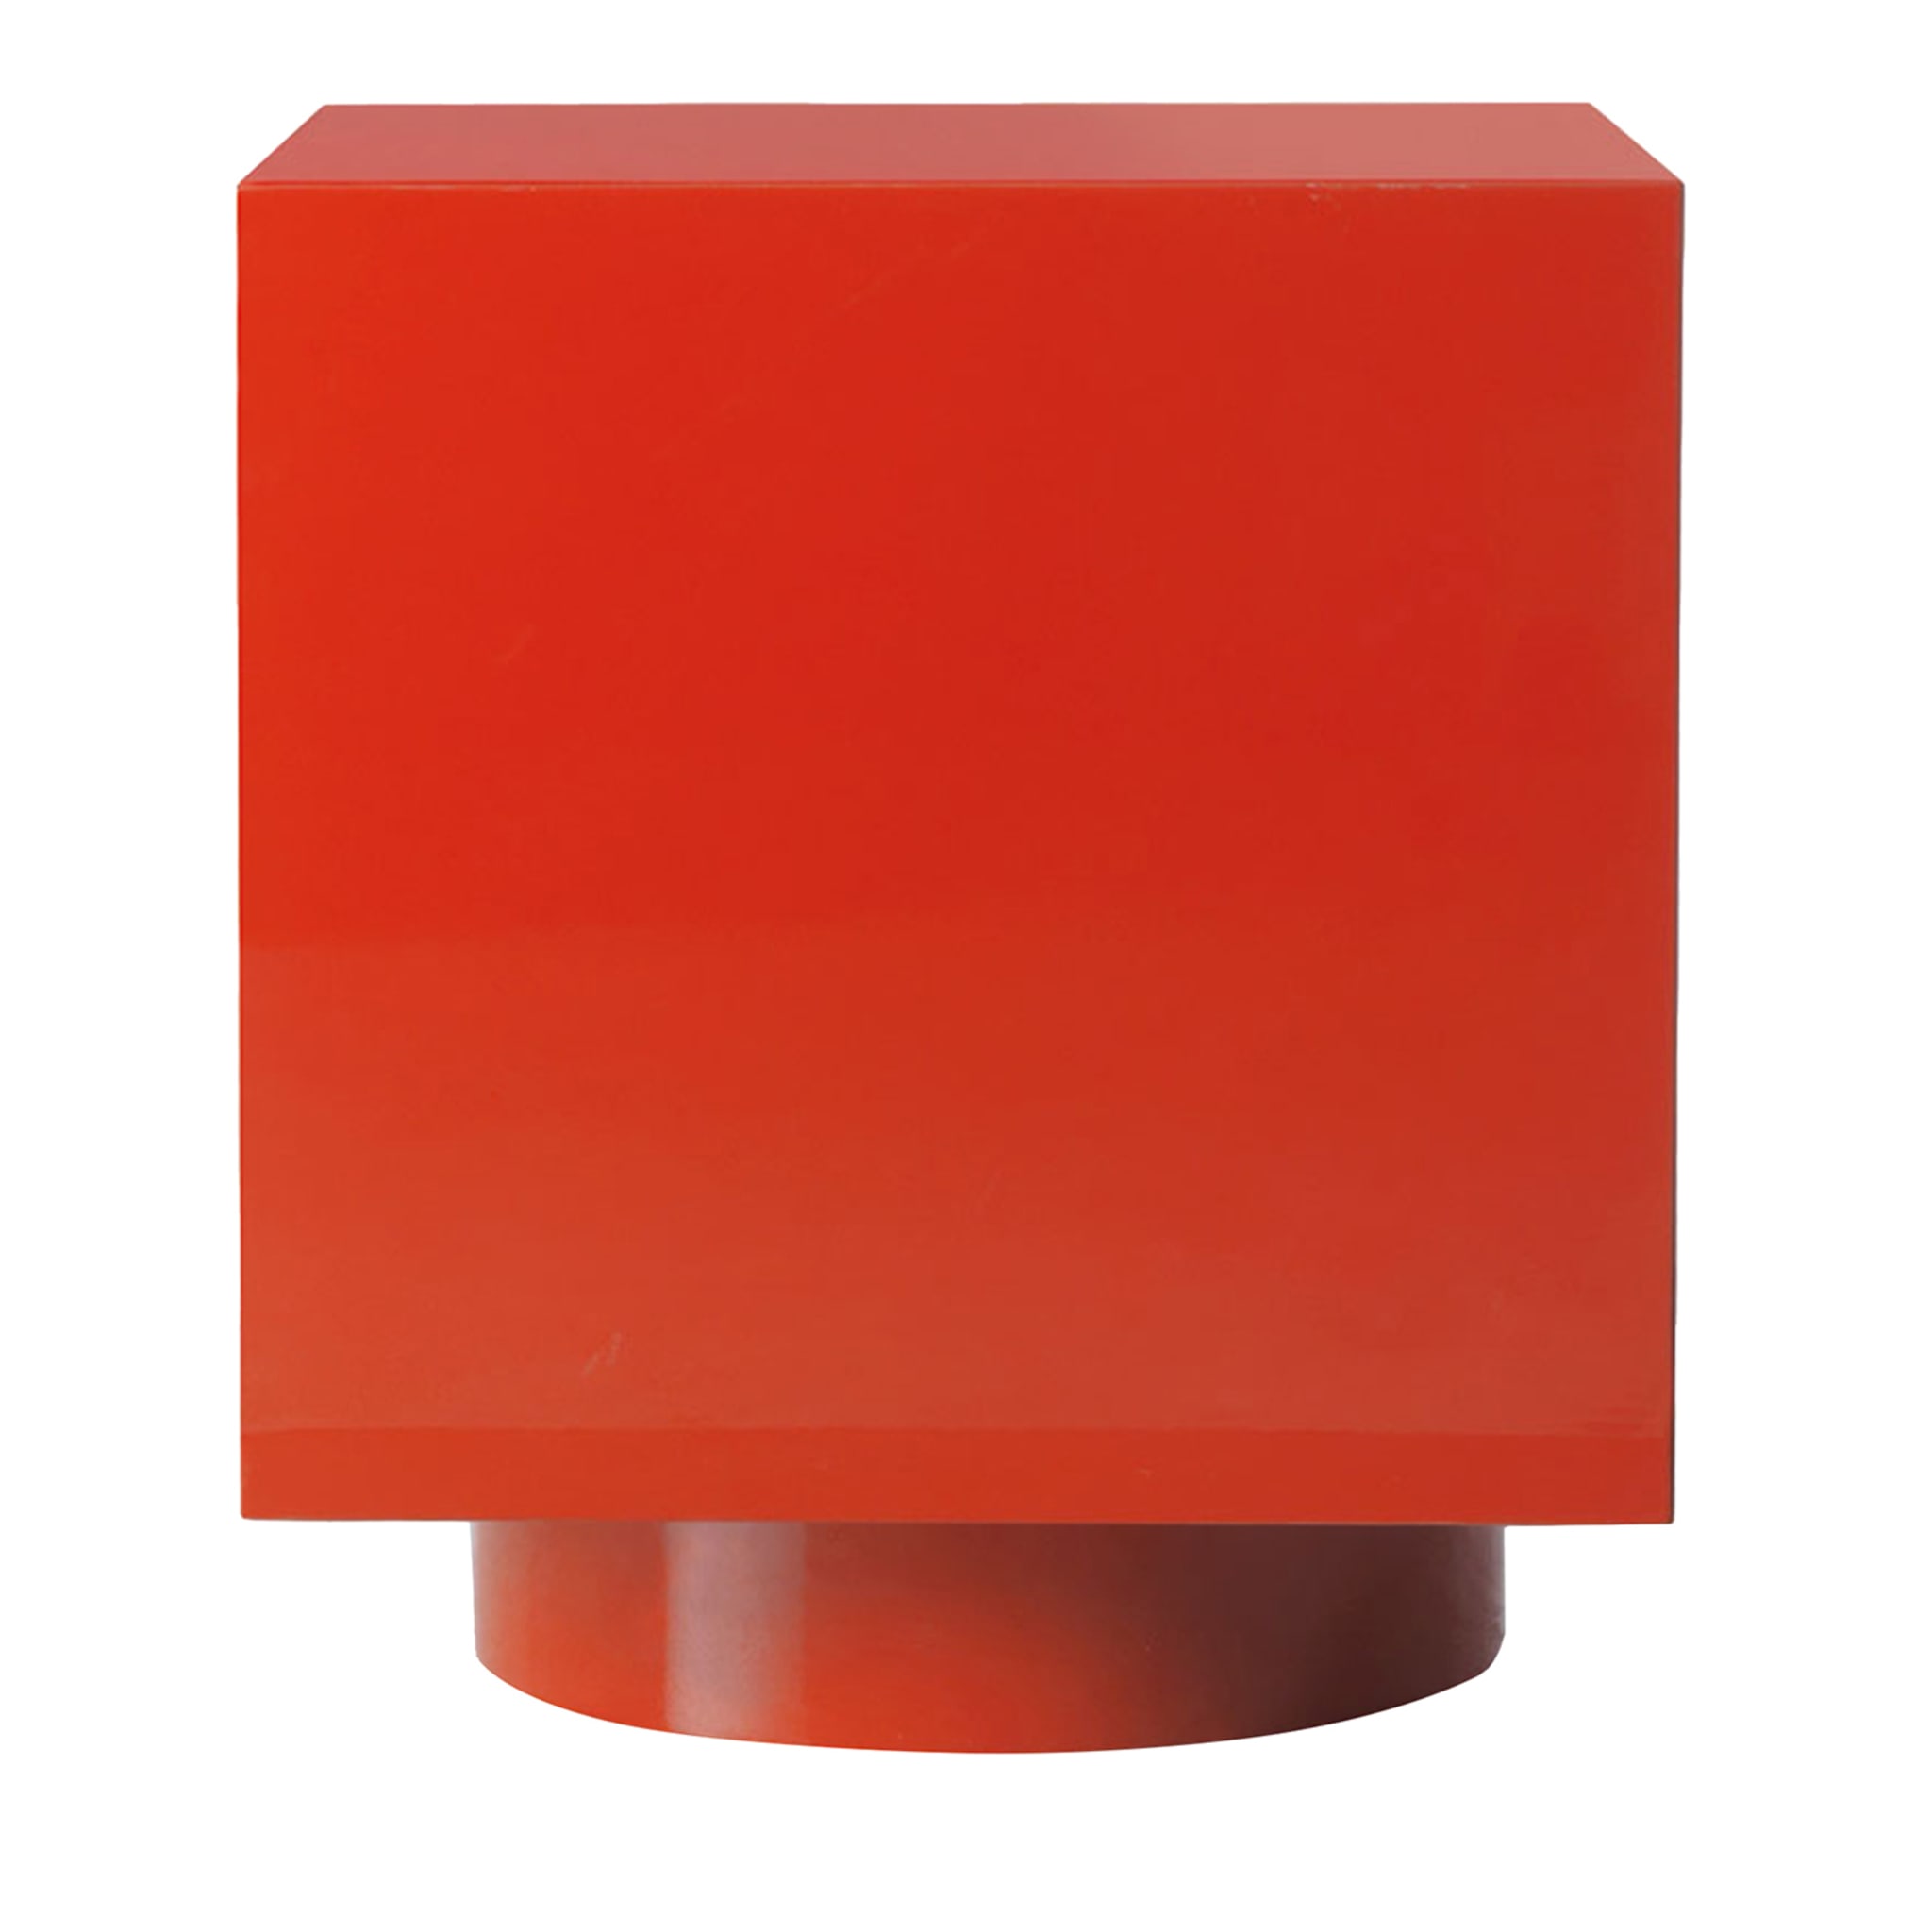 Rubik Red Side Table by Dainelli Studio #2 - Main view